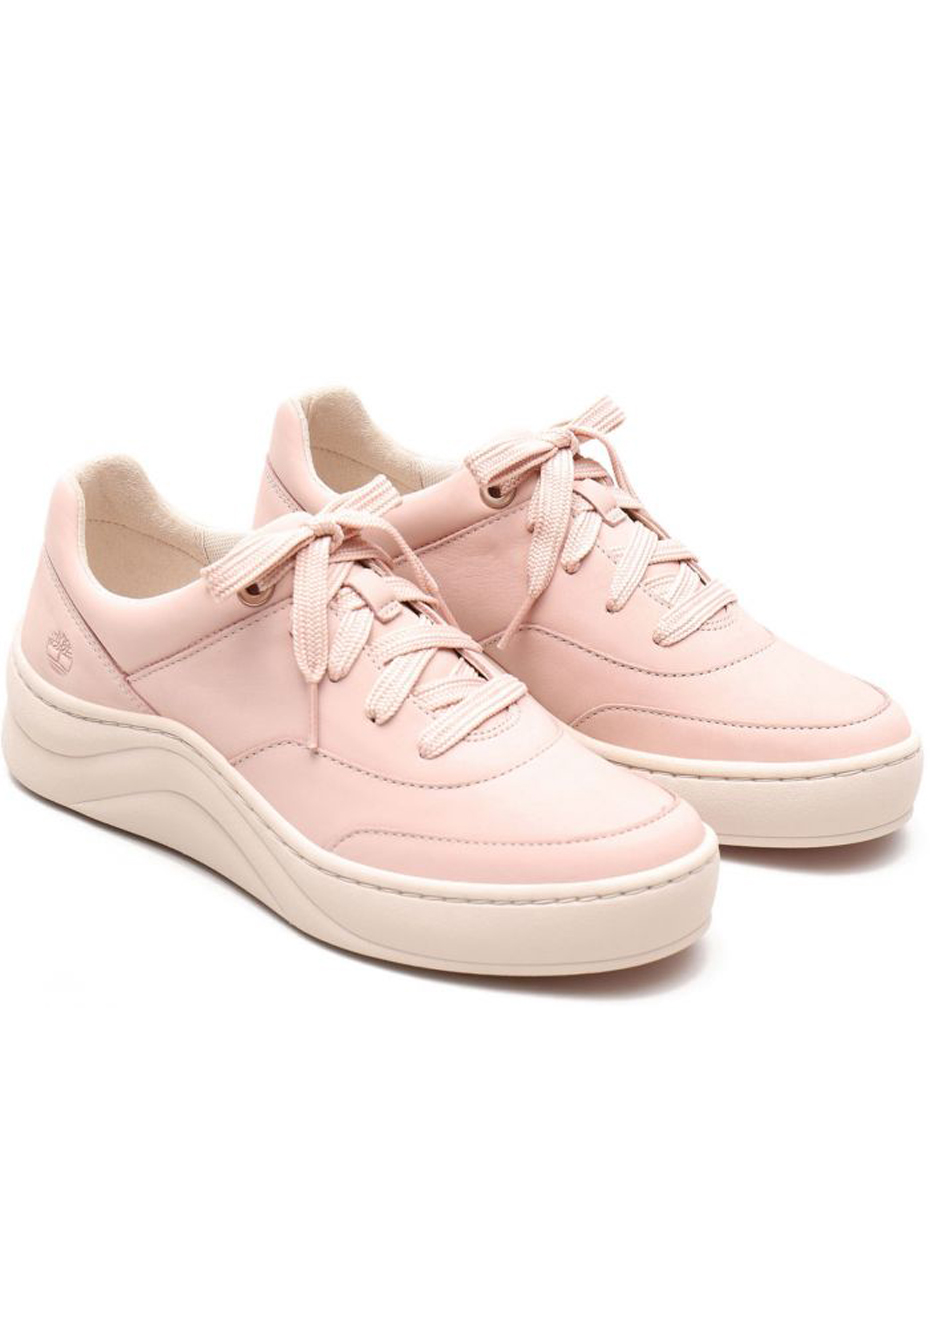 timberland ruby ann sneakers